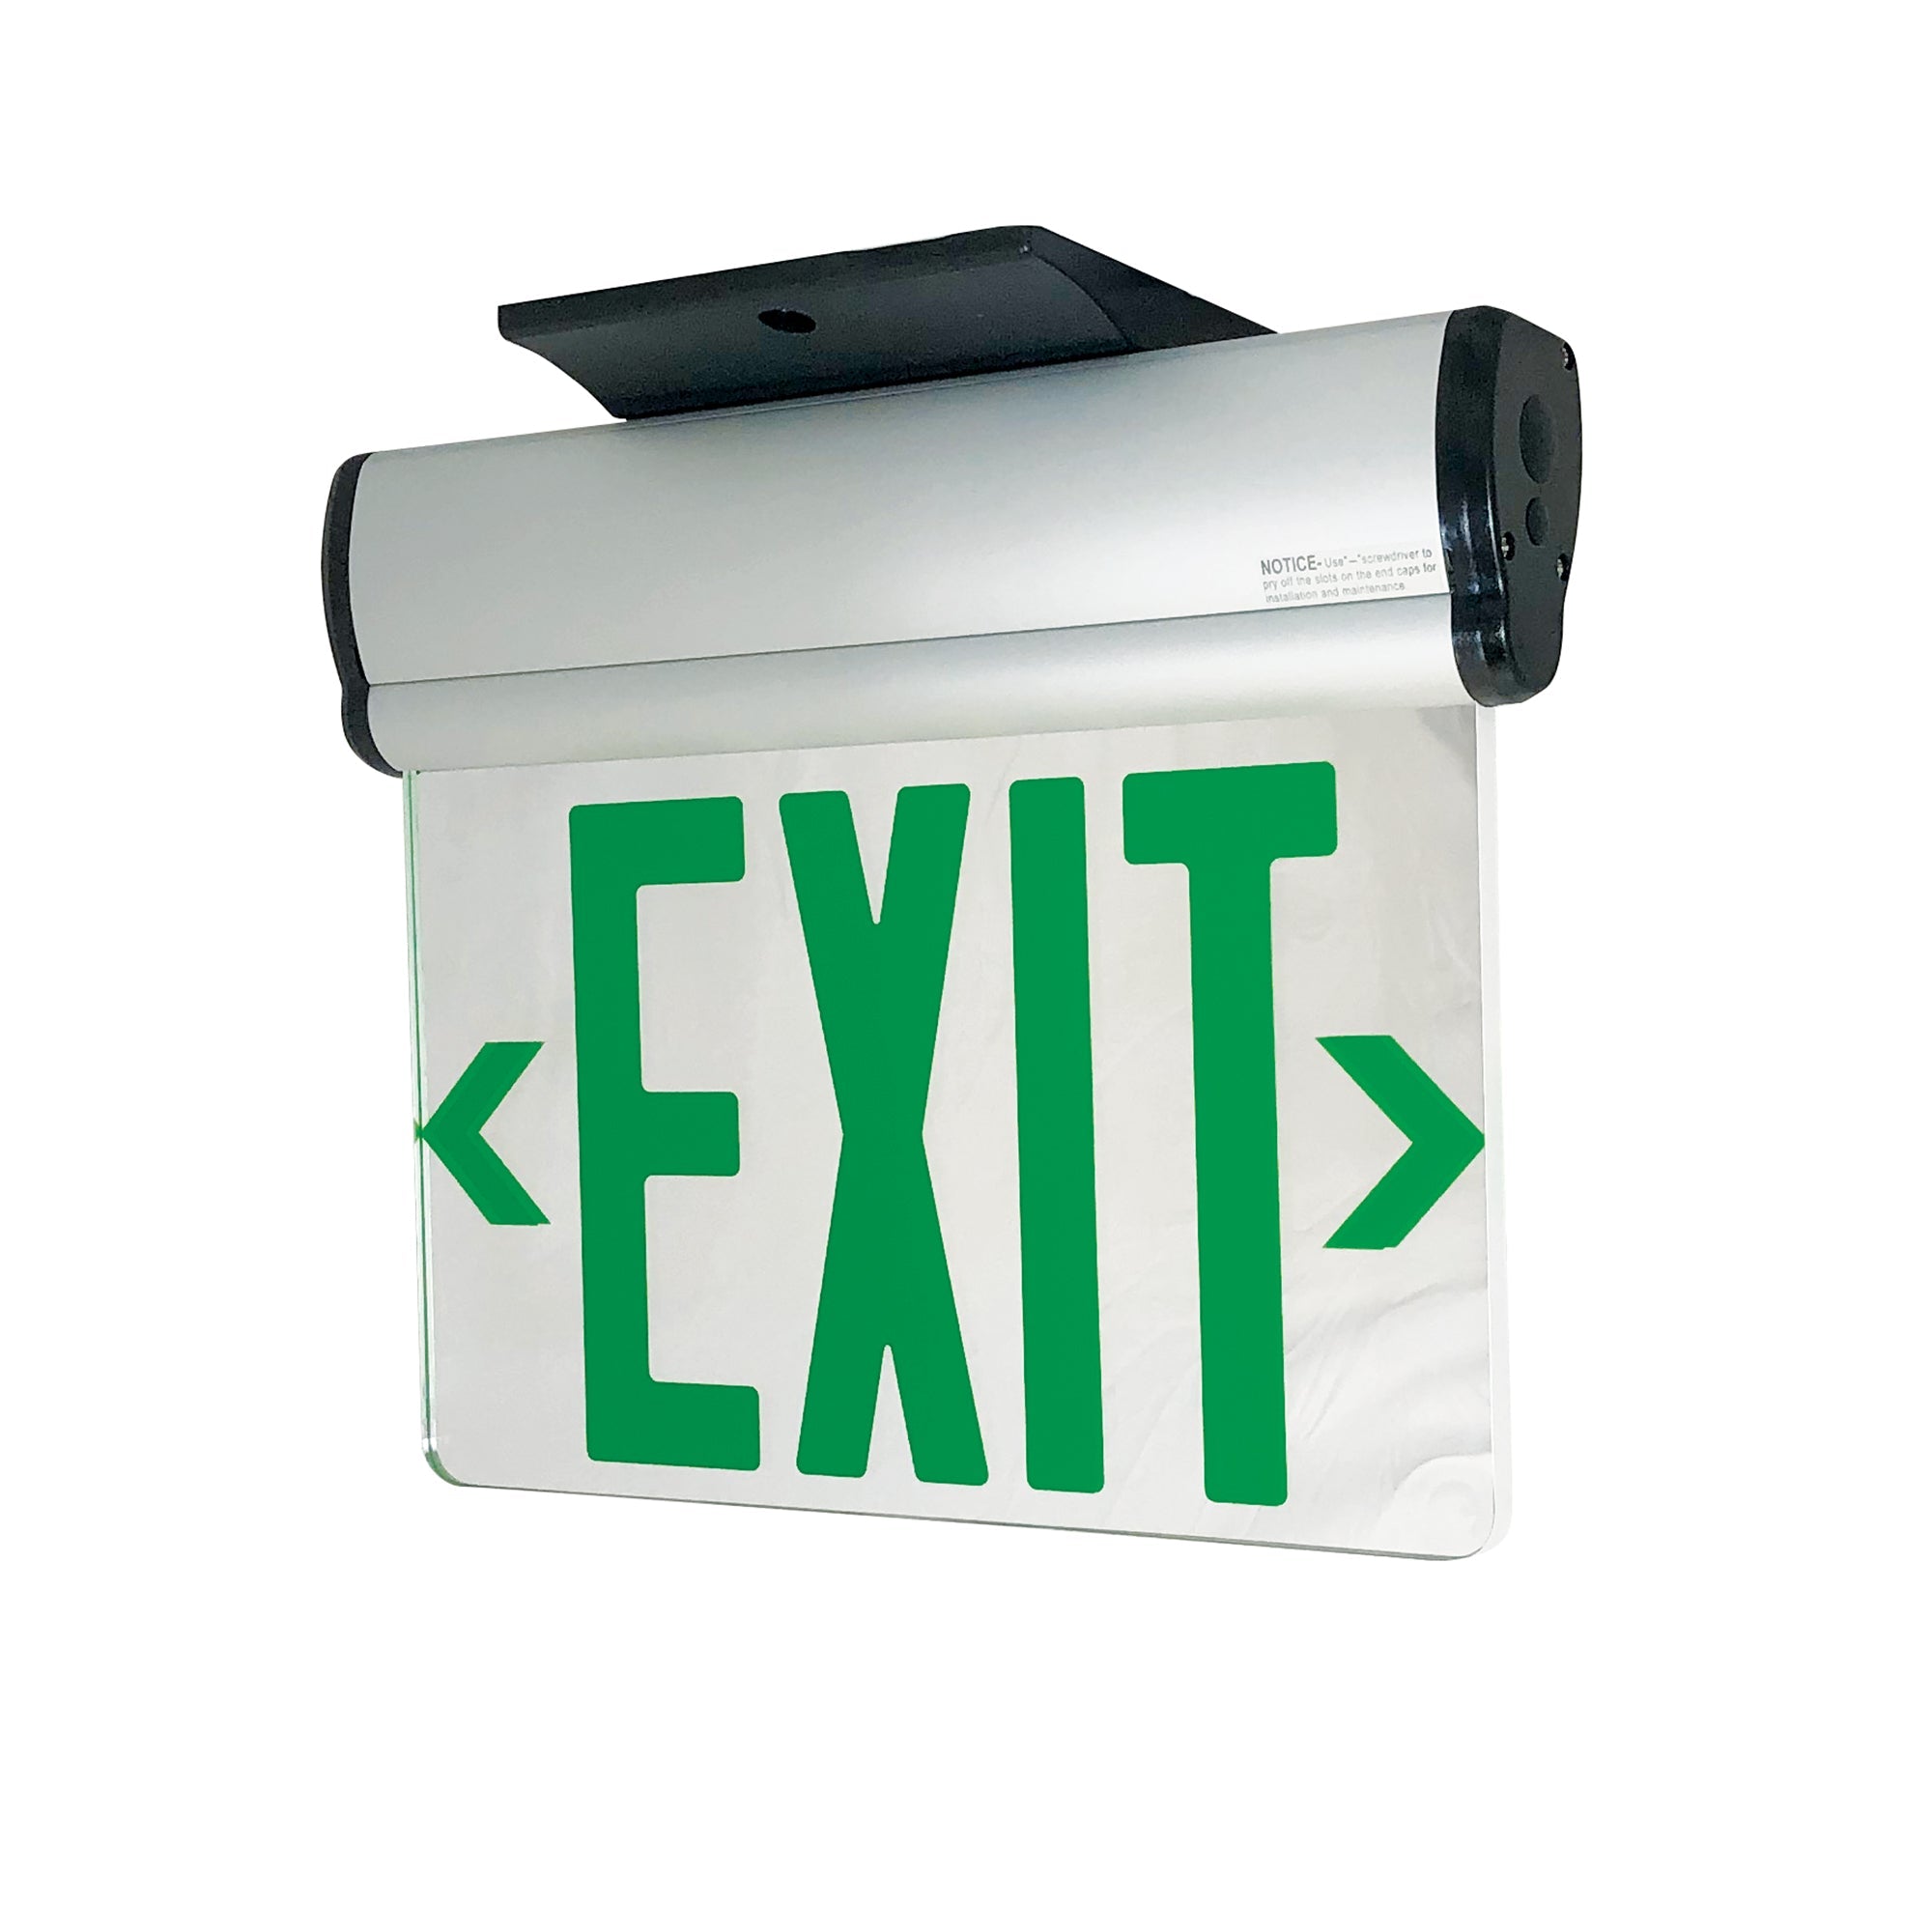 Nora Lighting NX-810-LEDGMA - Exit / Emergency - Surface Adjustable LED Edge-Lit Exit Sign, AC Only, 6 Inch Green Letters, Single Face / Mirrored Acrylic, Aluminum Housing